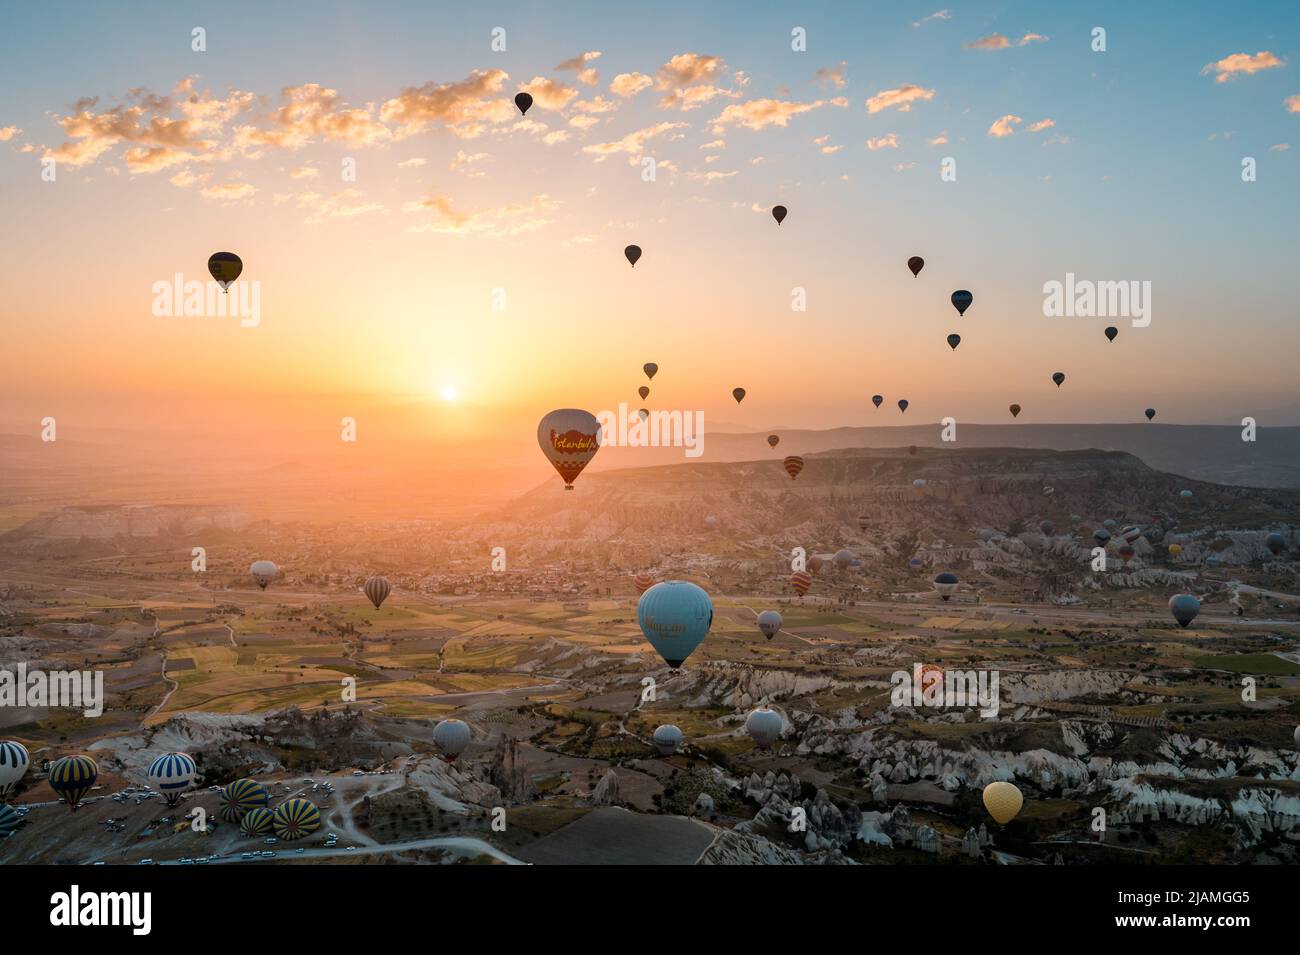 cappadocia travel picture with hot air balloons Stock Photo